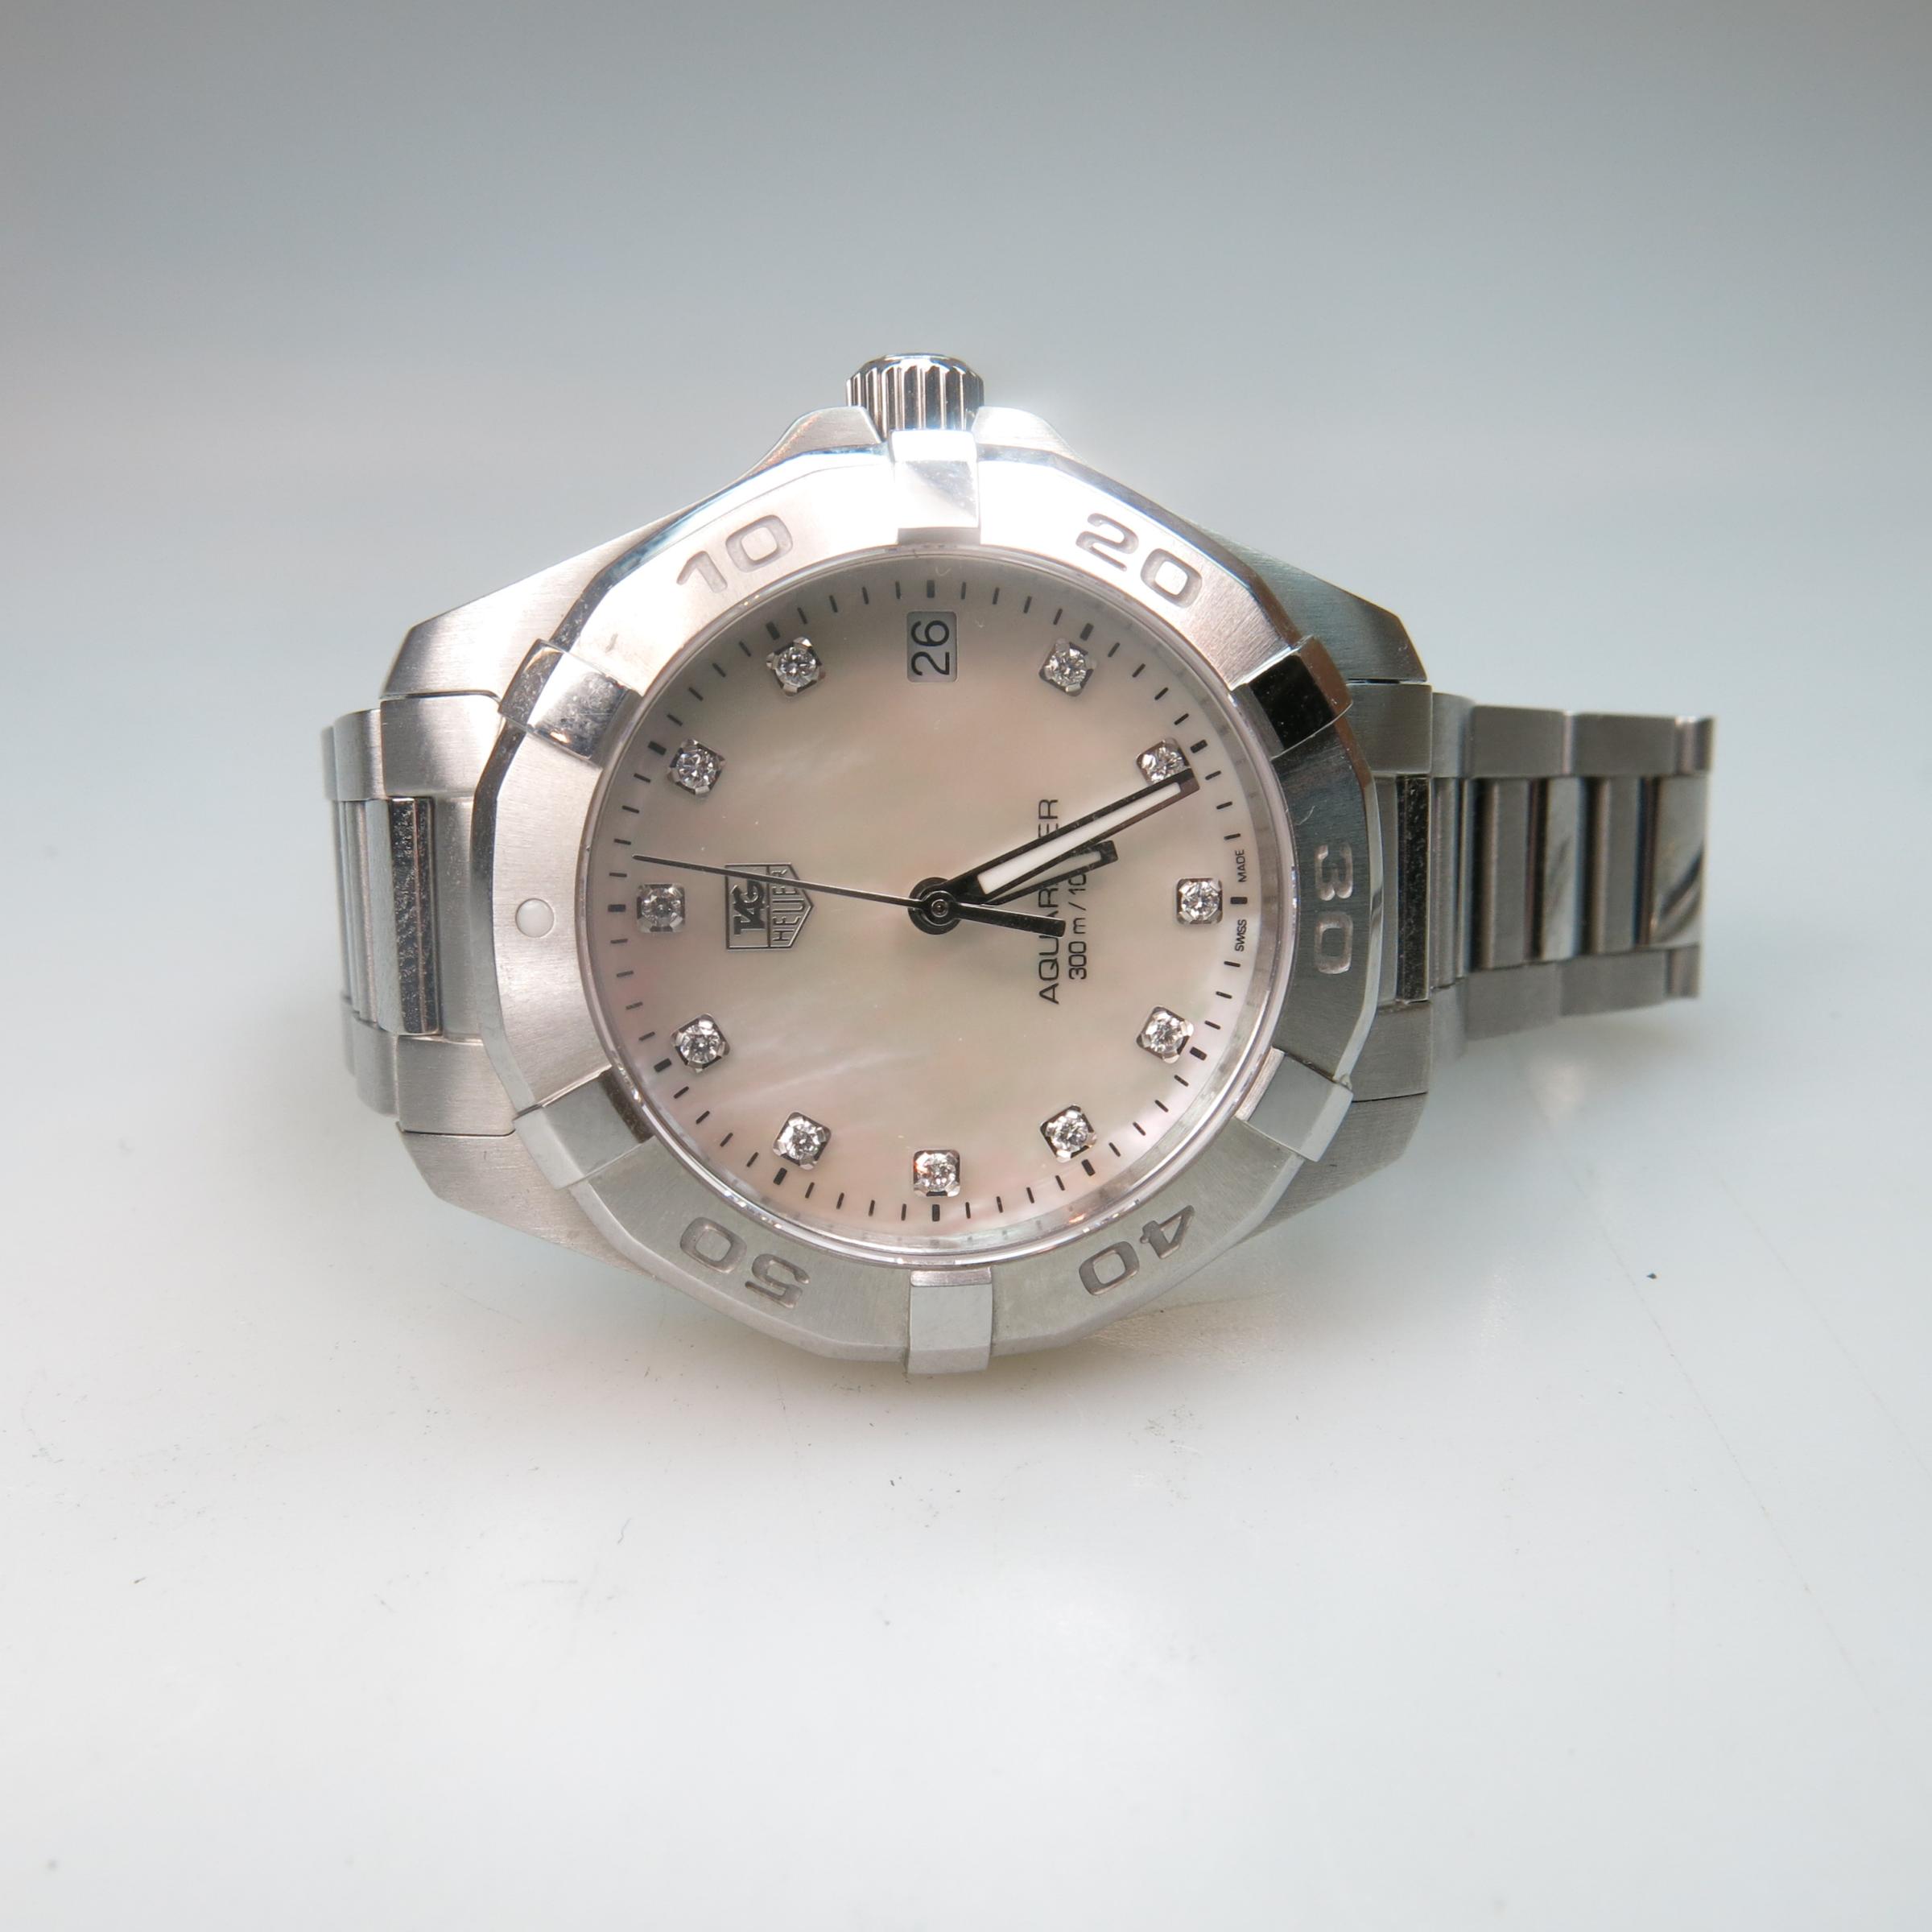 Lady's Tag/Heuer Aquaracer Wristwatch With Date